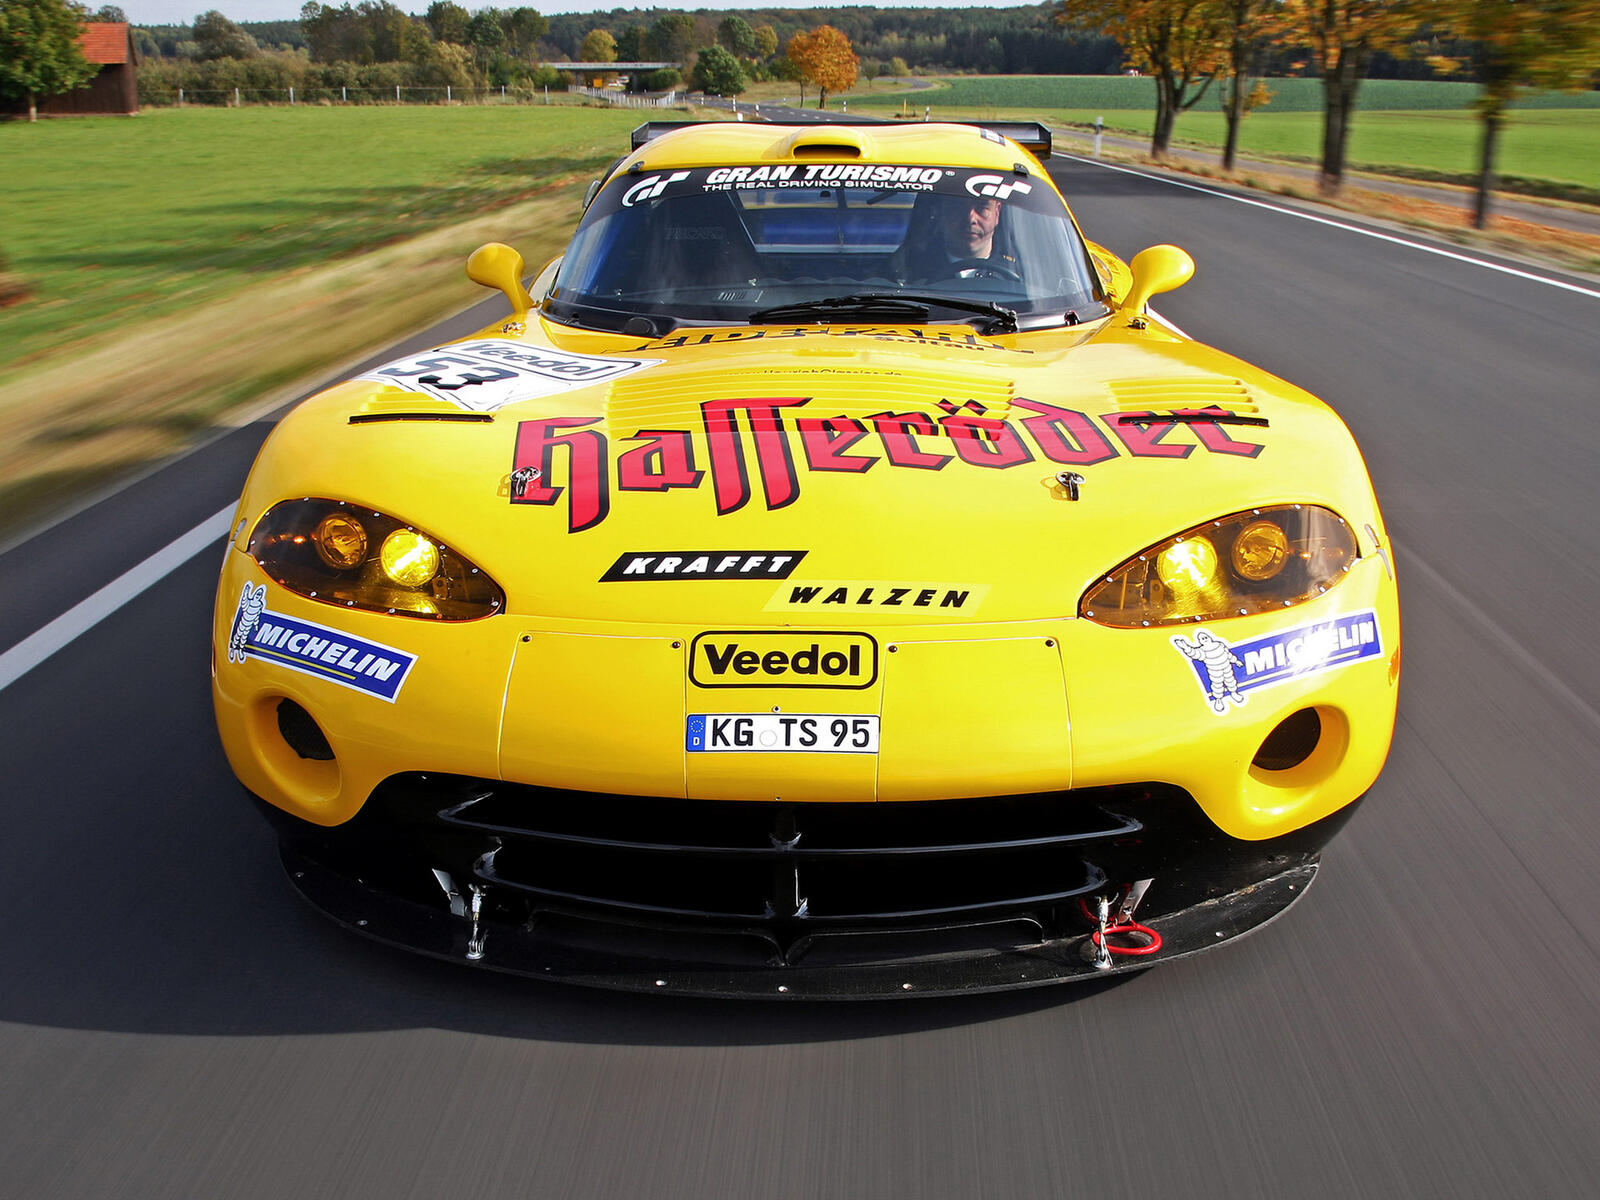 Wallpapers dodge viper yellow sports on the desktop